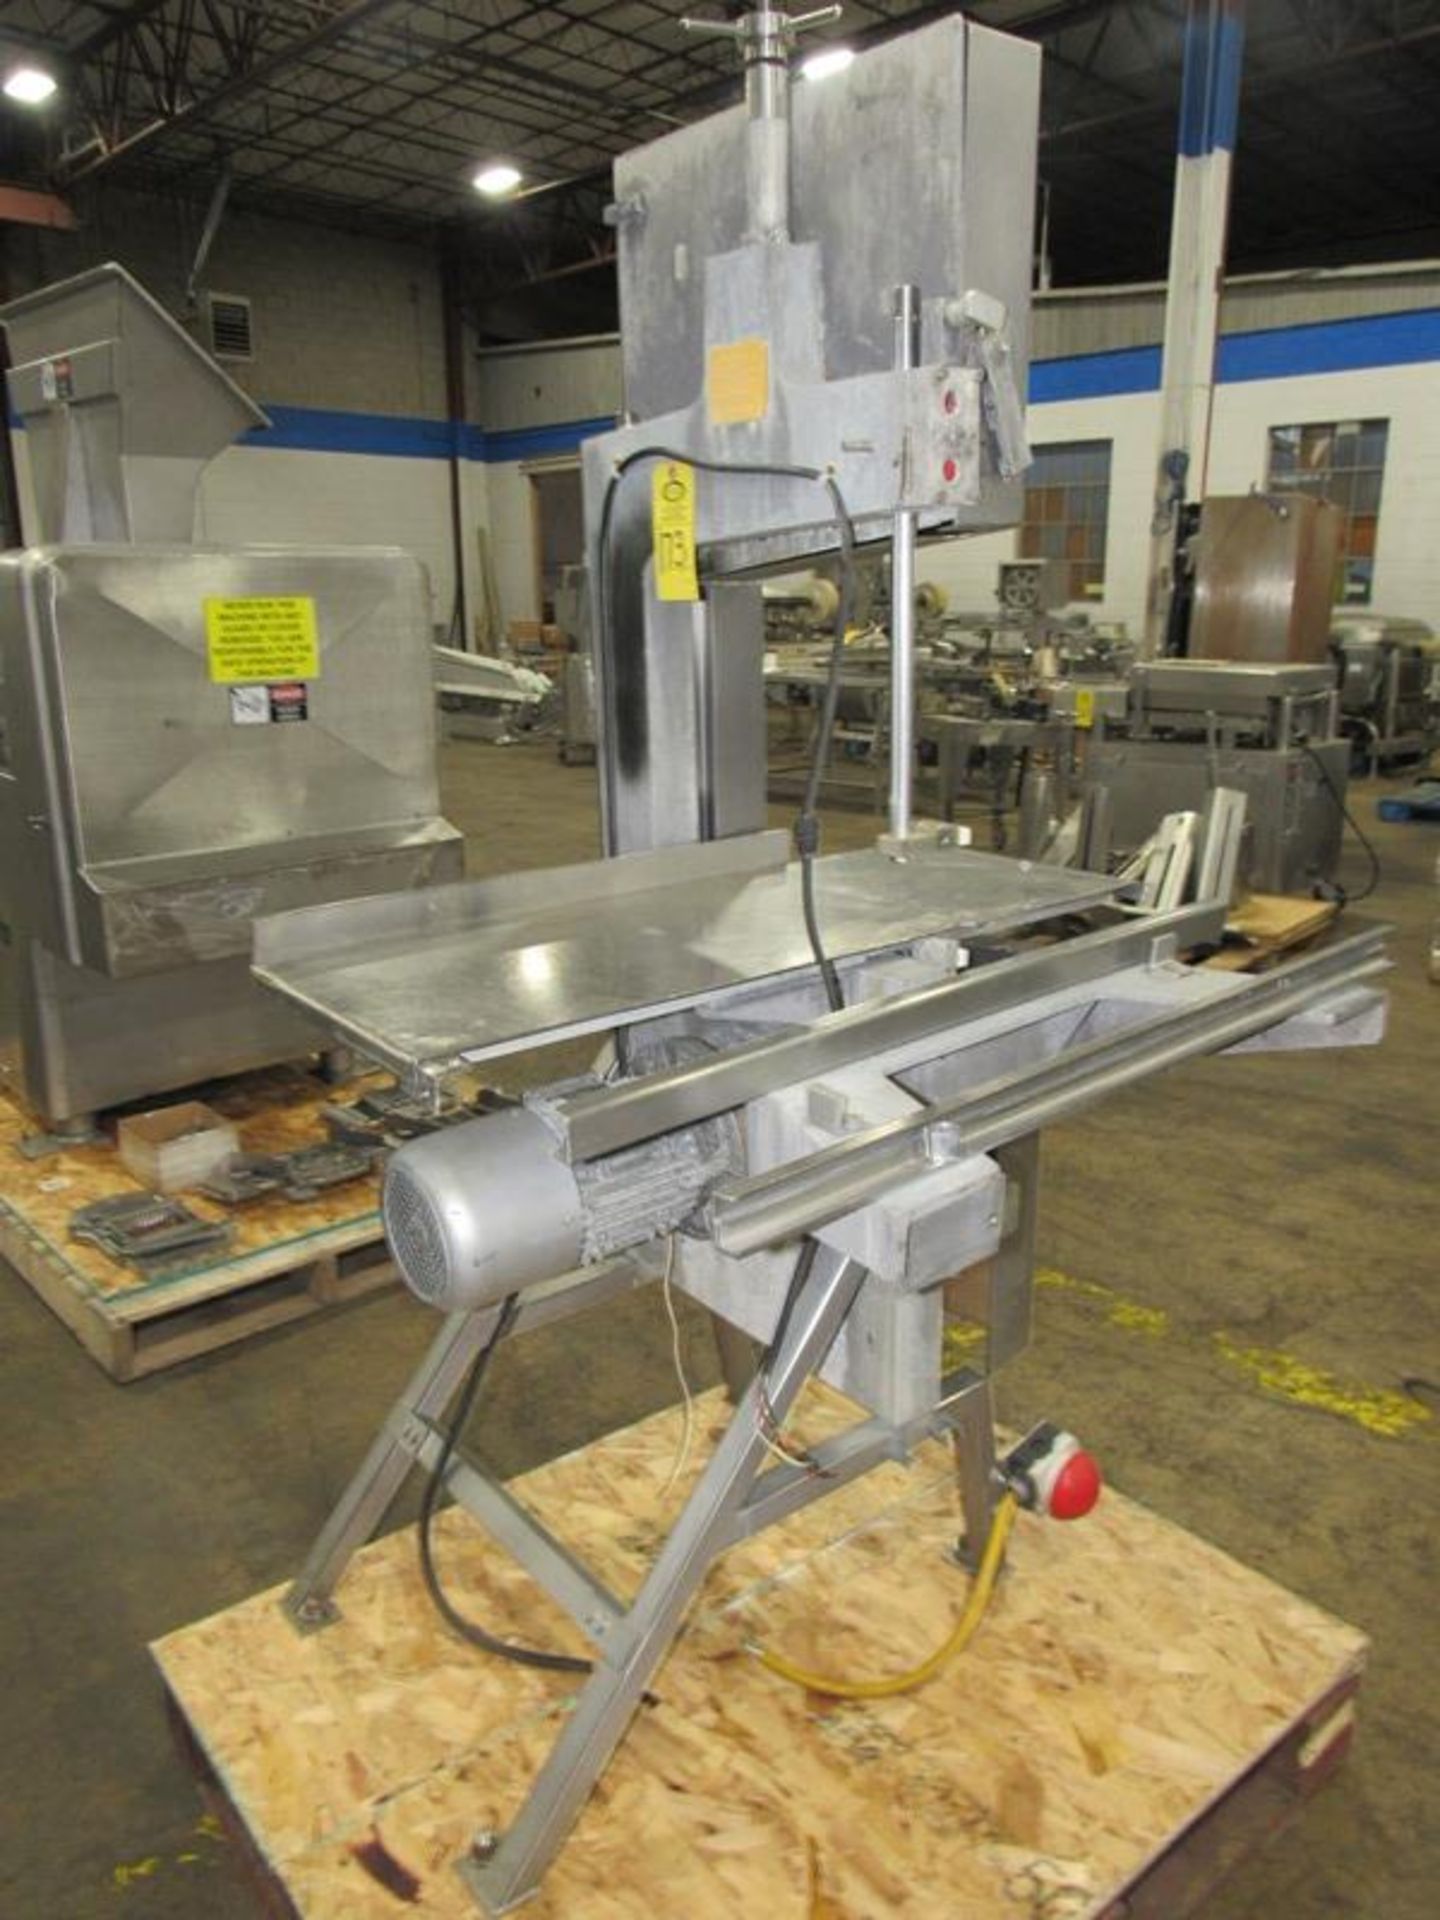 AEW Mdl. 400 Band Saw, aluminum head, missing moveable table and motor cover (Located in Plano, IL)